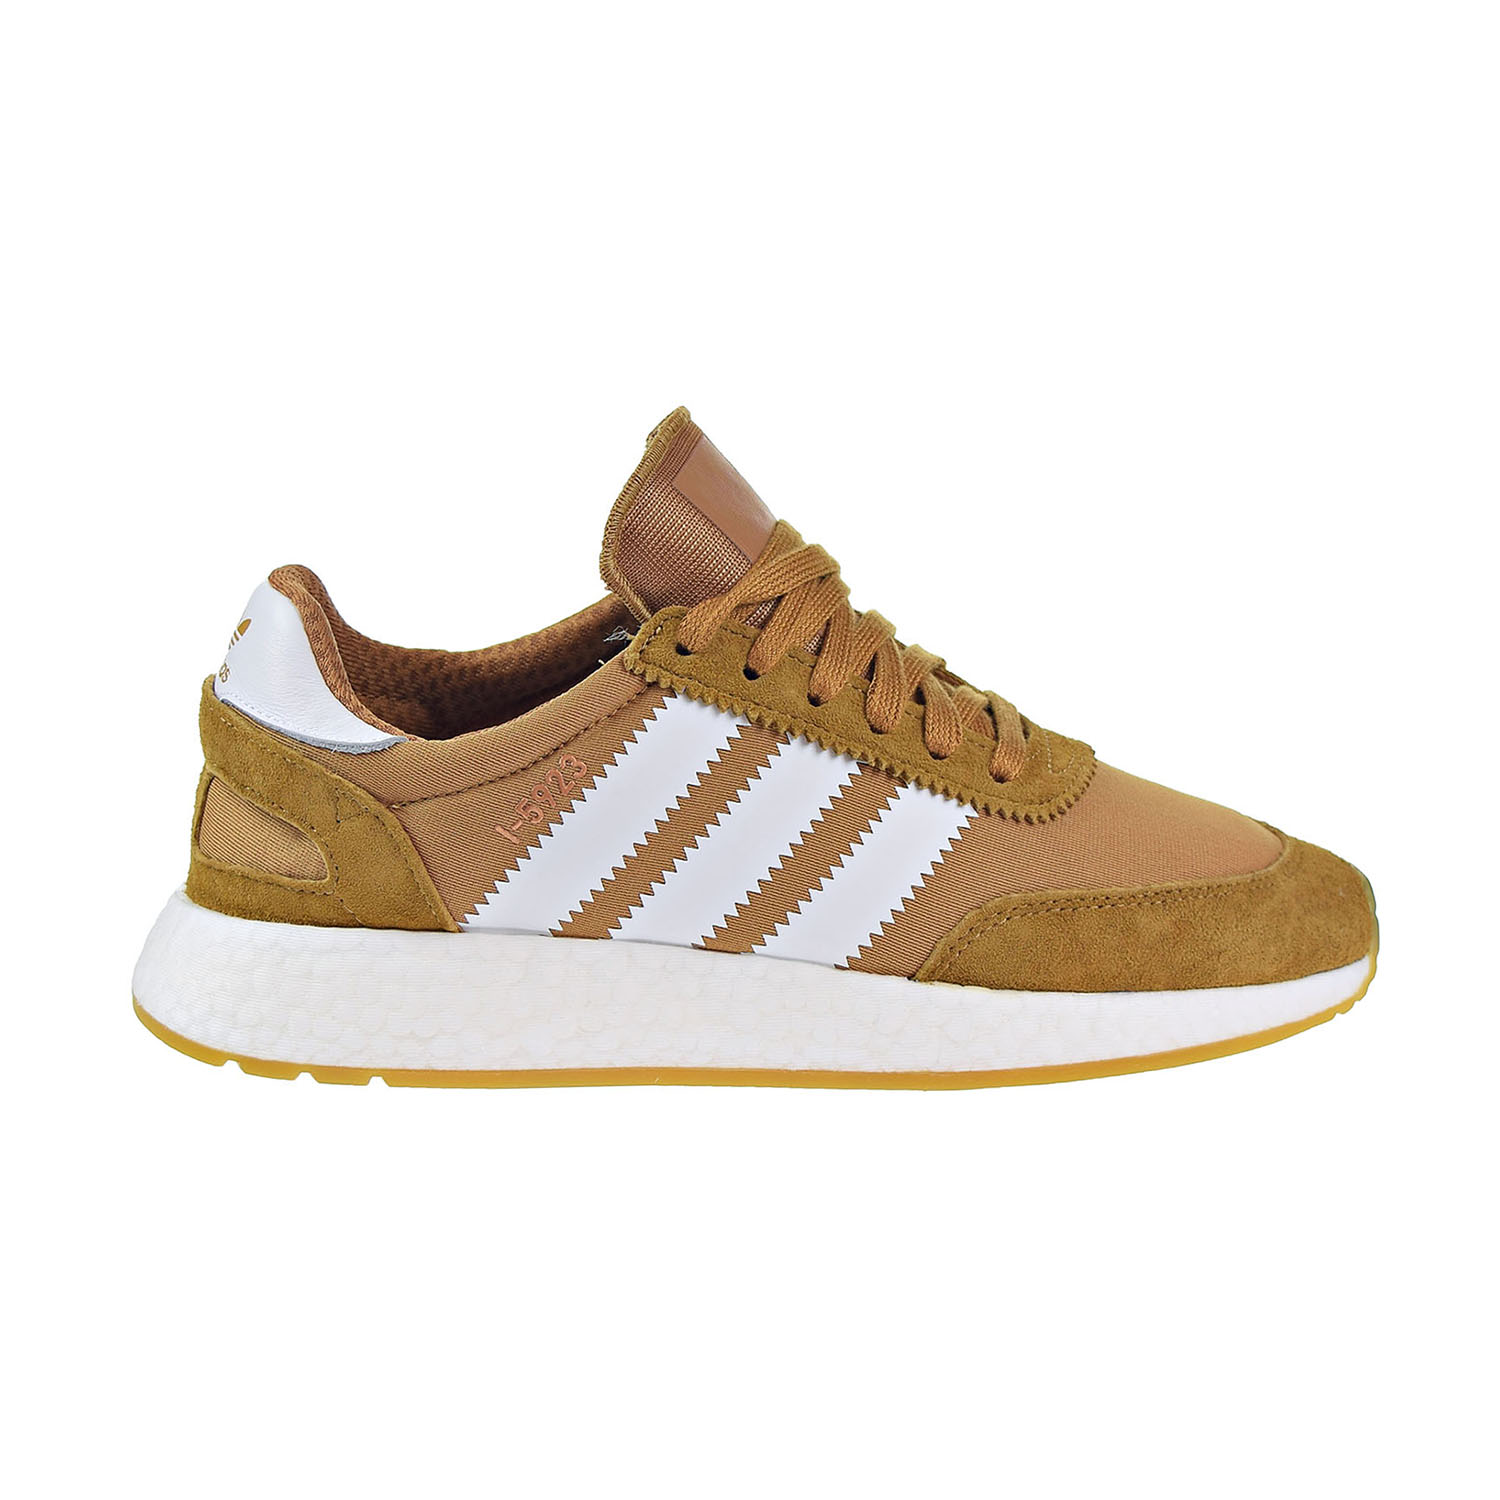 adidas white and tan shoes